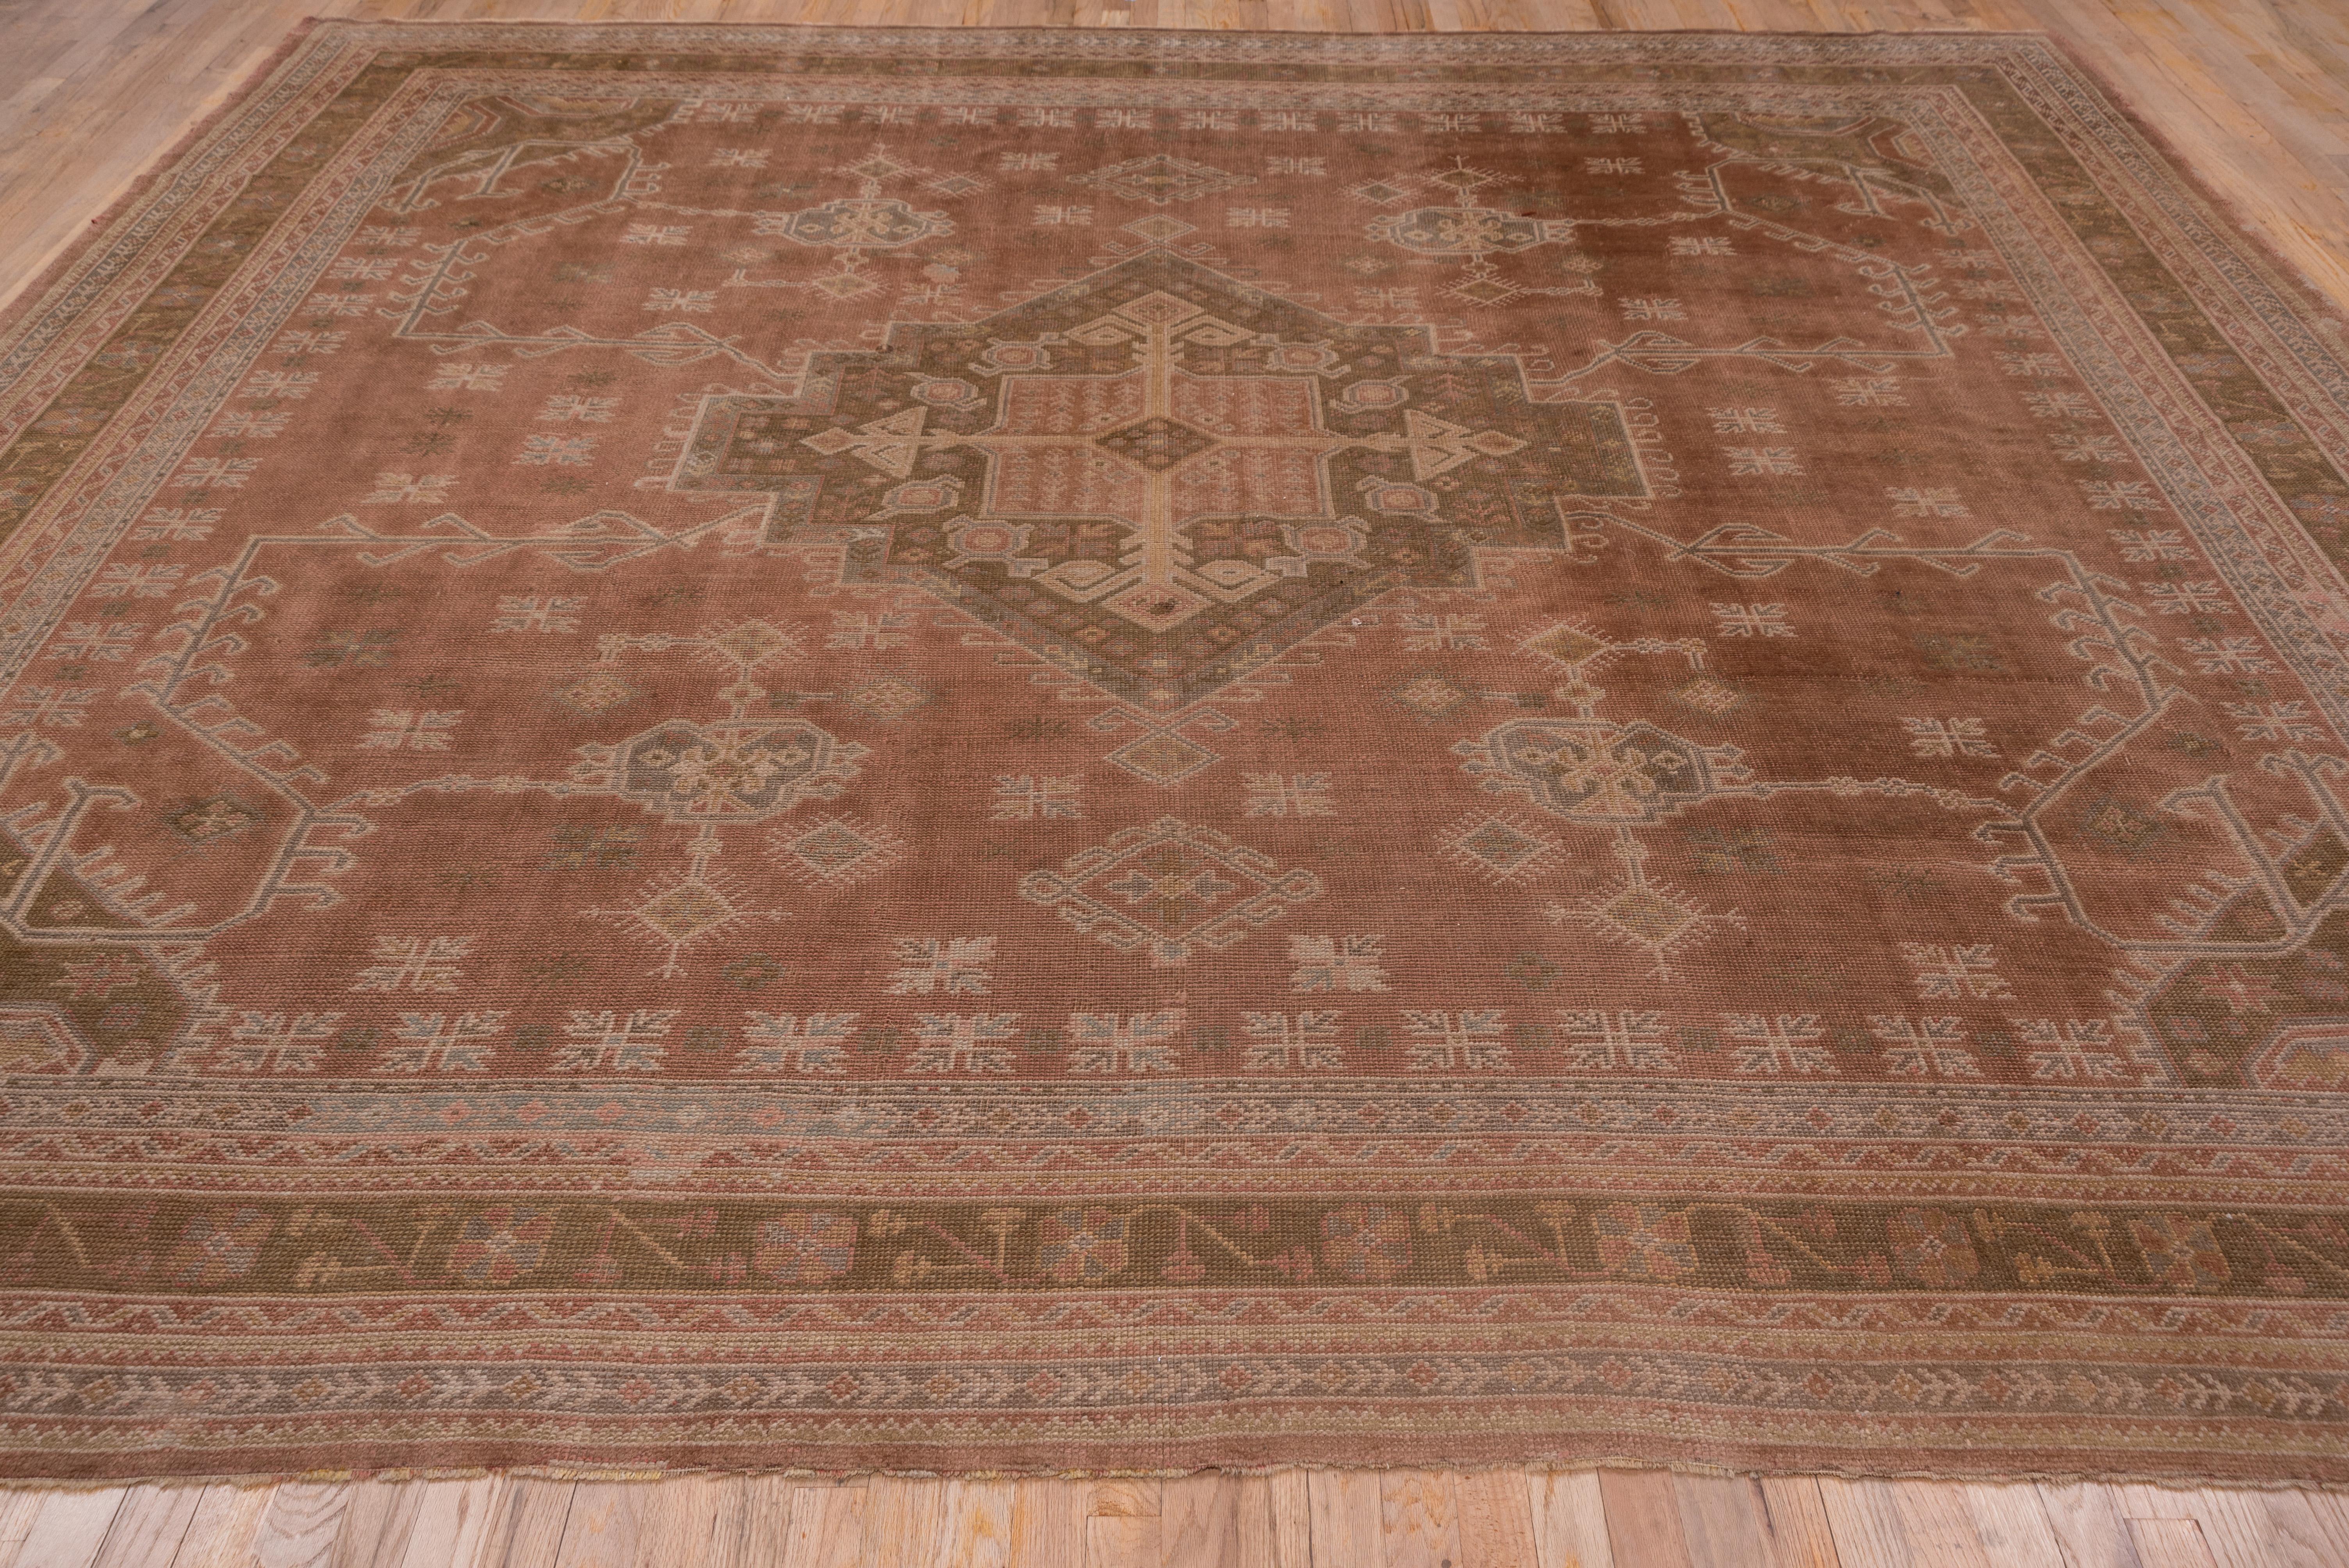 Antique Square Oushak Carpet, Pink Field In Good Condition For Sale In New York, NY